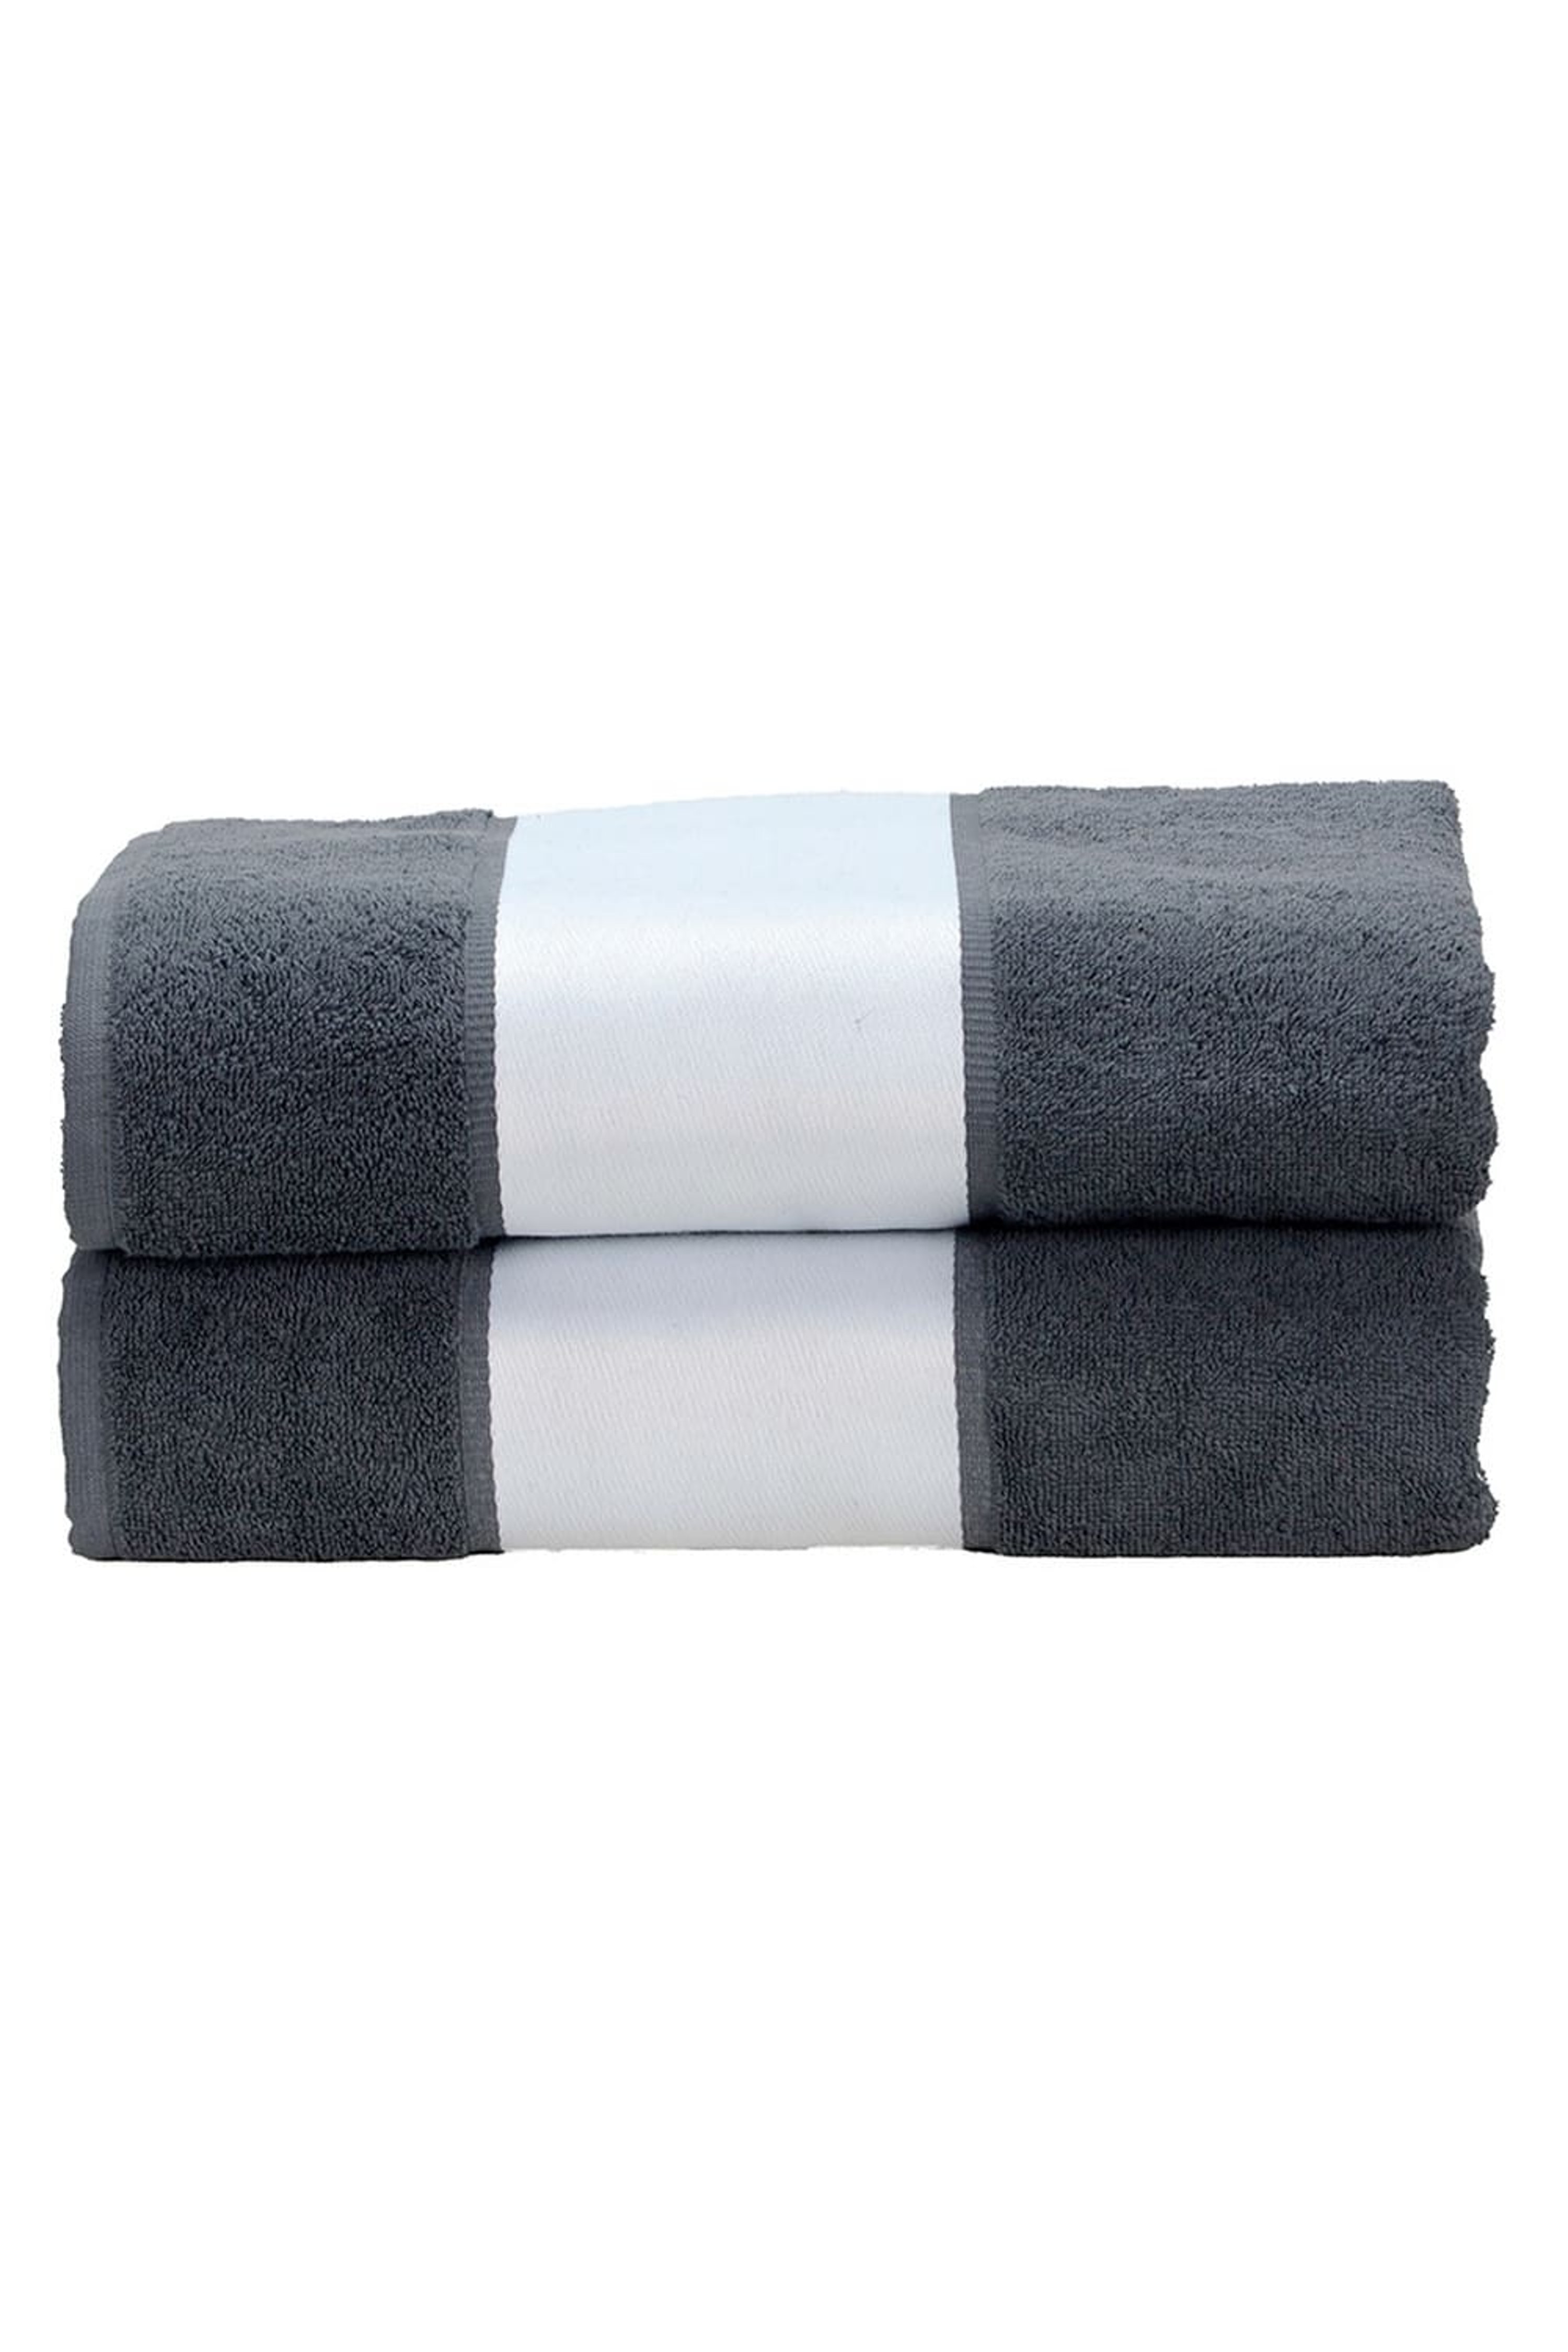 A&R TOWELS A&R TOWELS A&R TOWELS SUBLI-ME BATH TOWEL (ANTHRACITE GRAY) (ONE SIZE)